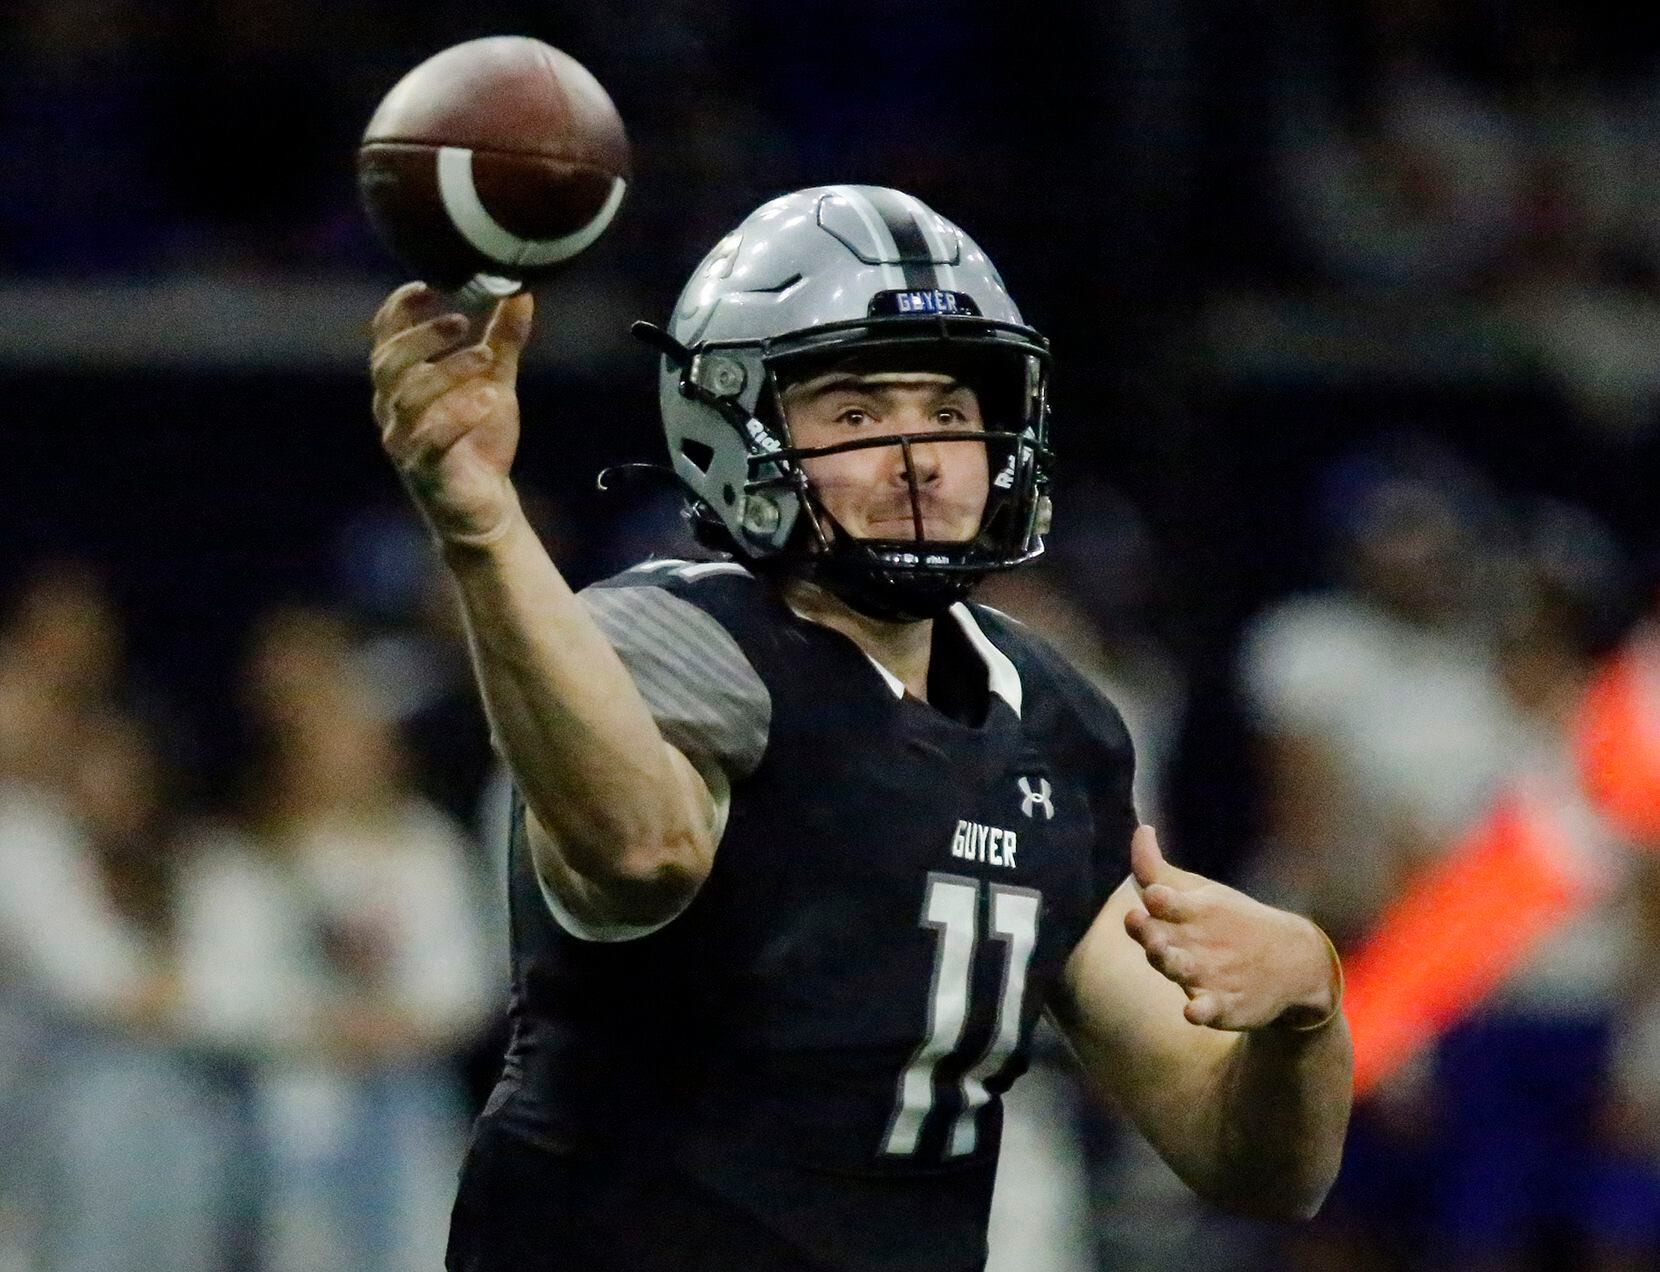 Guyer High School quarterback Jackson Arnold (11) throws a pass during the first half as Denton Guyer High School played Trophy Club Byron Nelson High School in a Class 6A Division II Region I semifinal football game at The Ford Center in Frisco on Saturday, November 27, 2021. (Stewart F. House/Special Contributor)